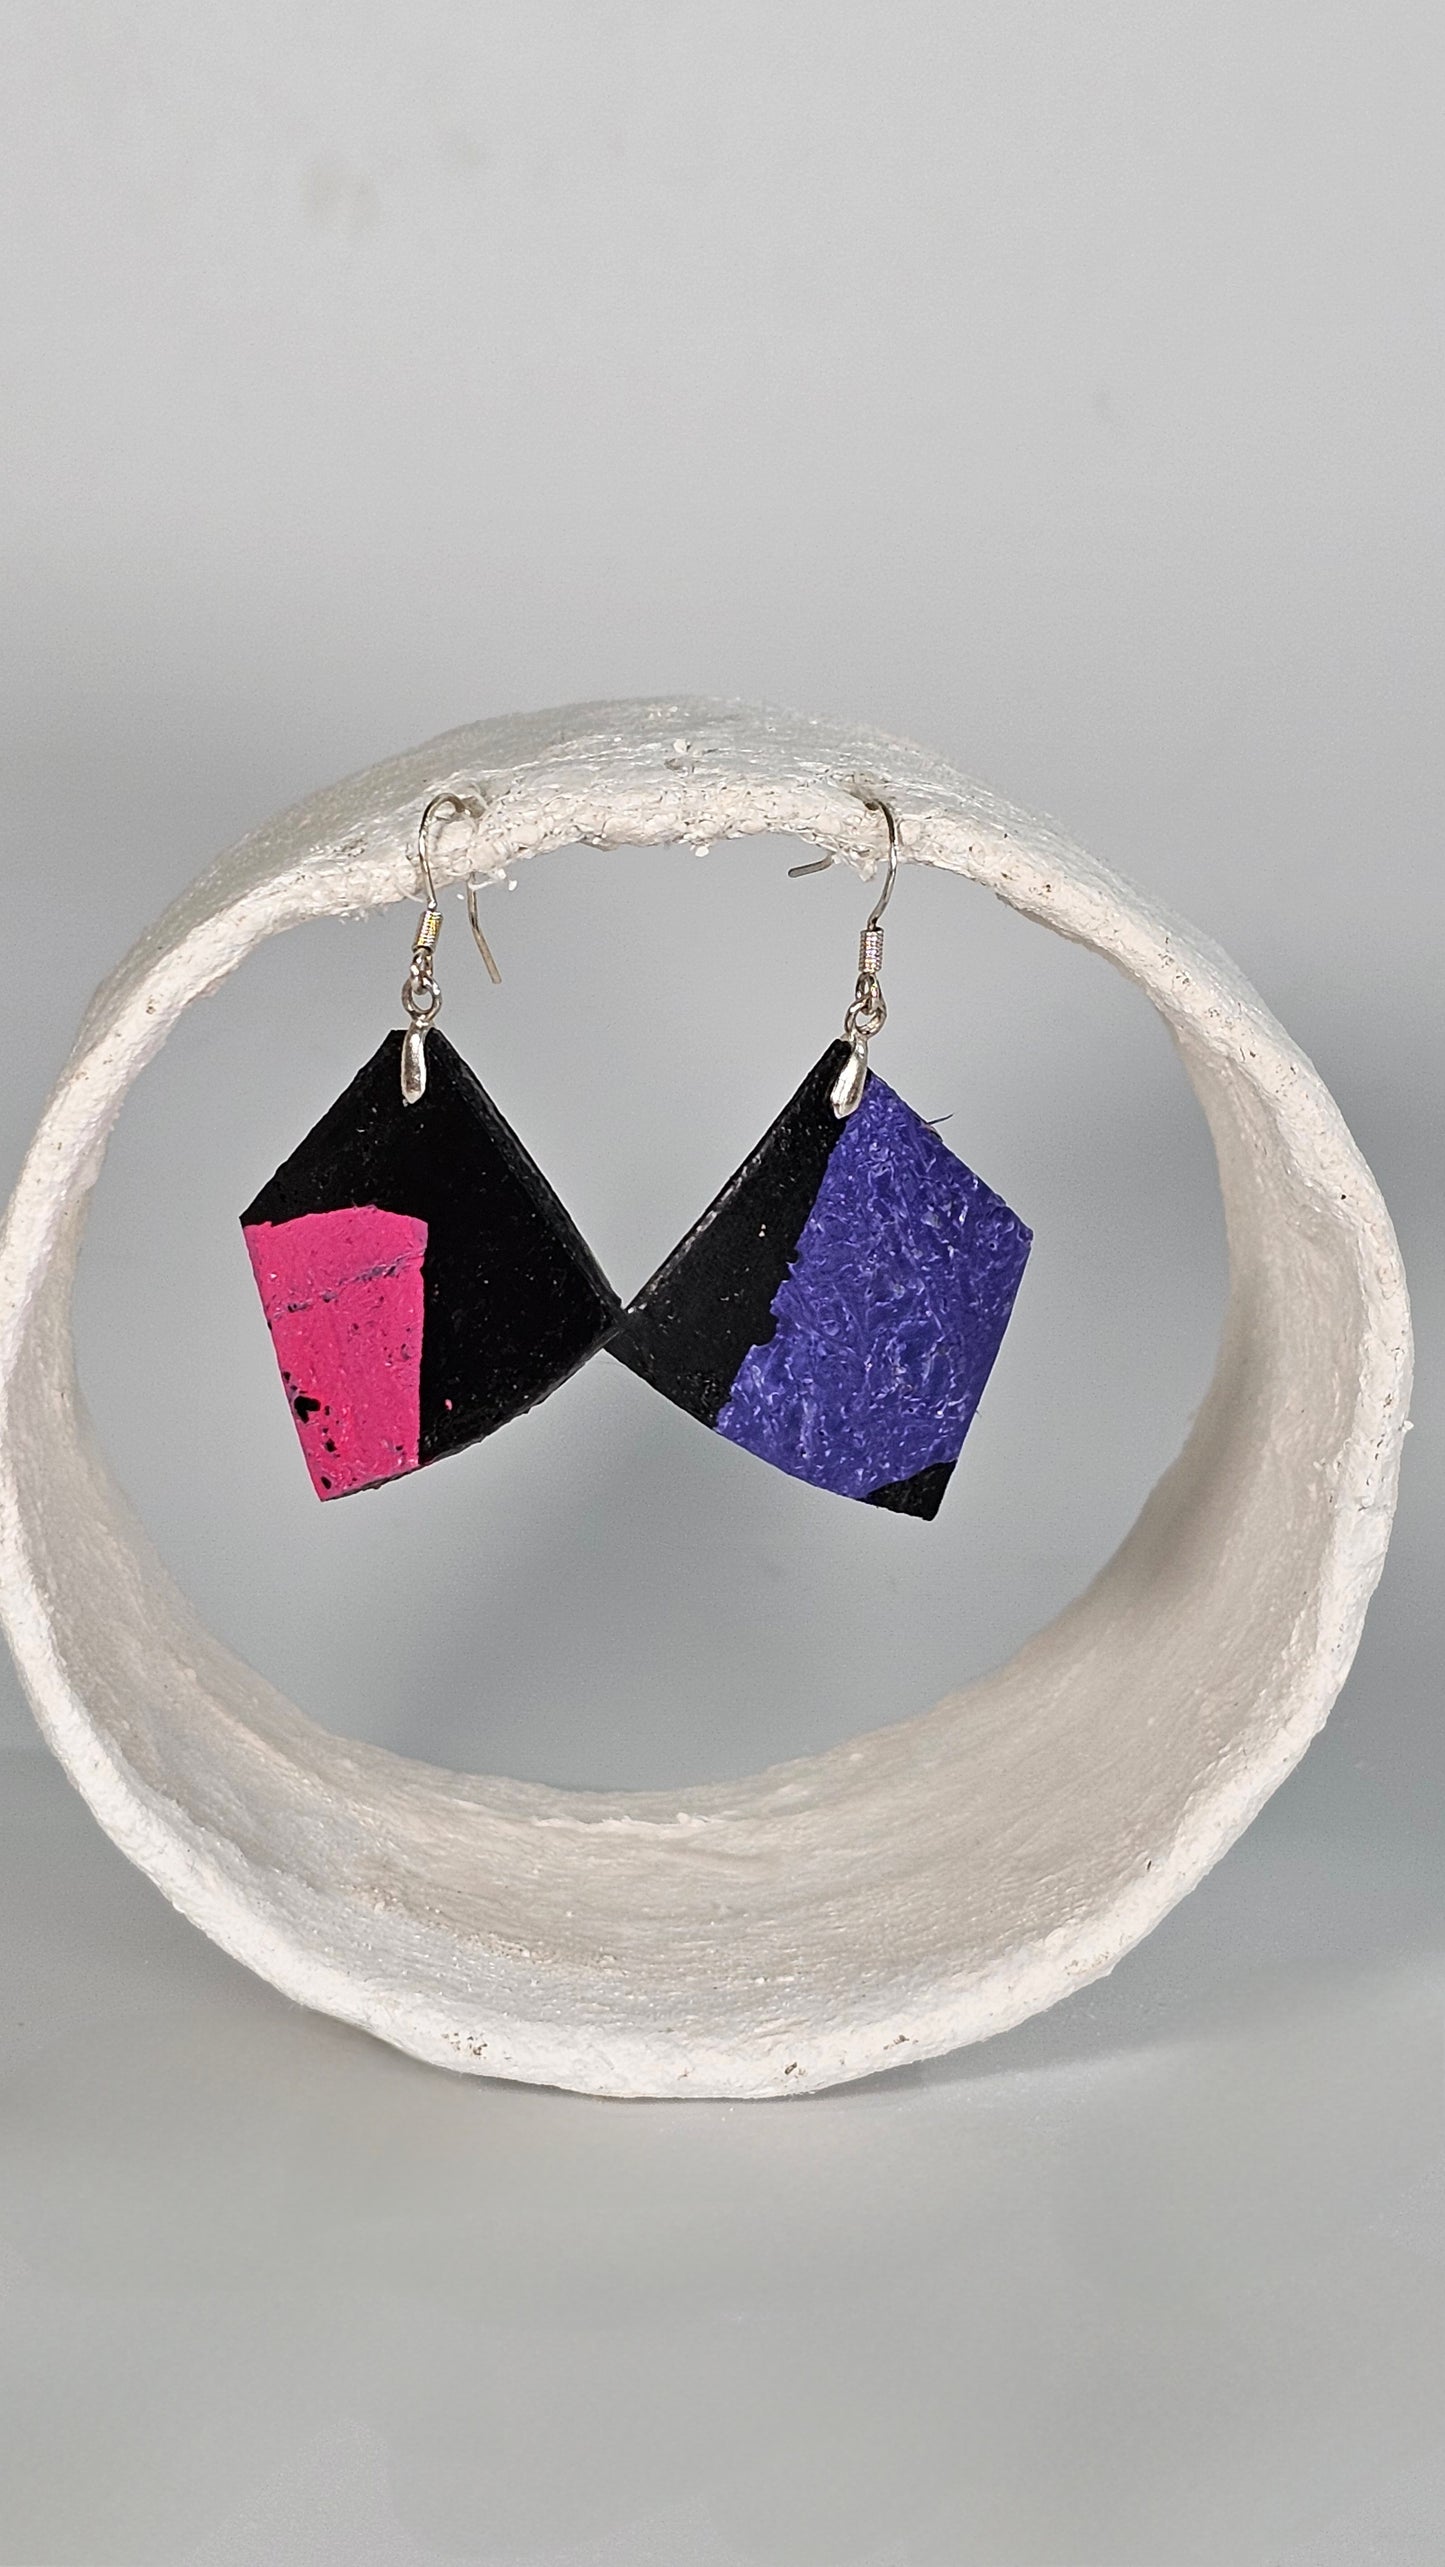 pink and purple on black quadrilateral earrings - PLASTIQUE By Siân